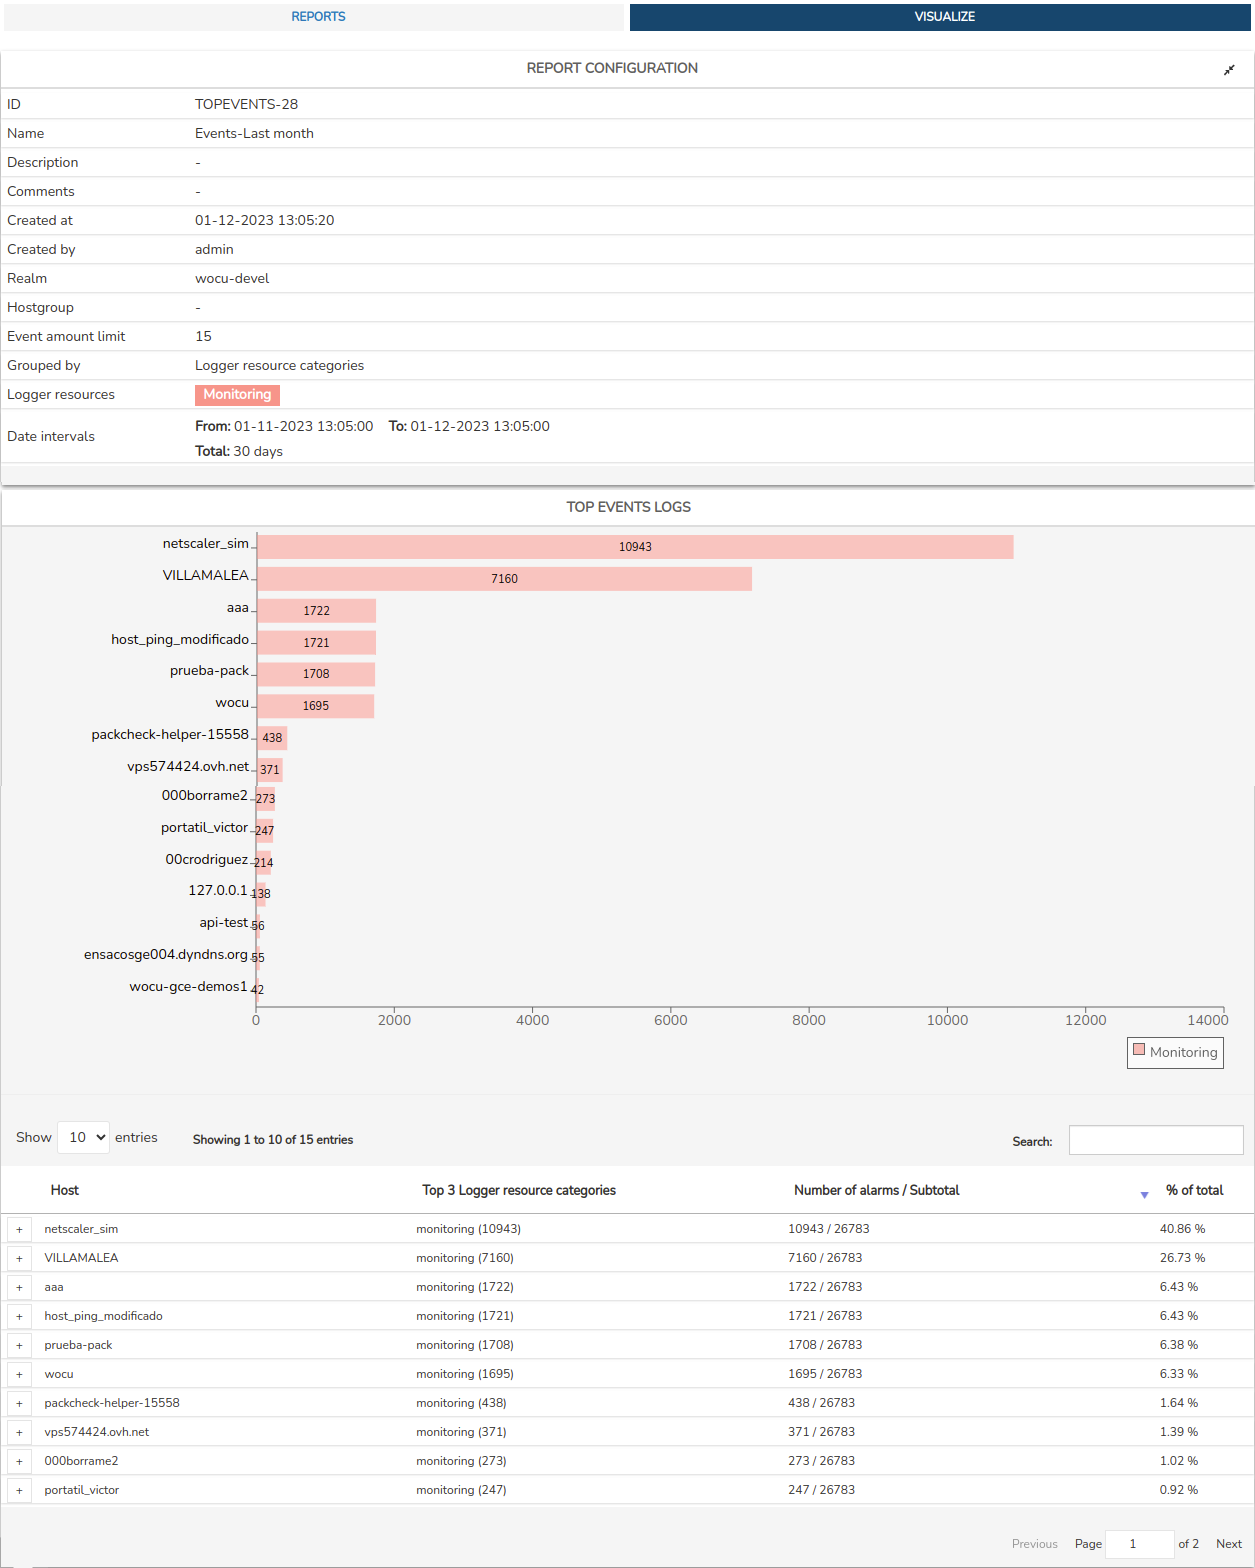 ../../_images/3_042_aggregator_realm_reports_reports_top-events-visualize-tab_0-58.png